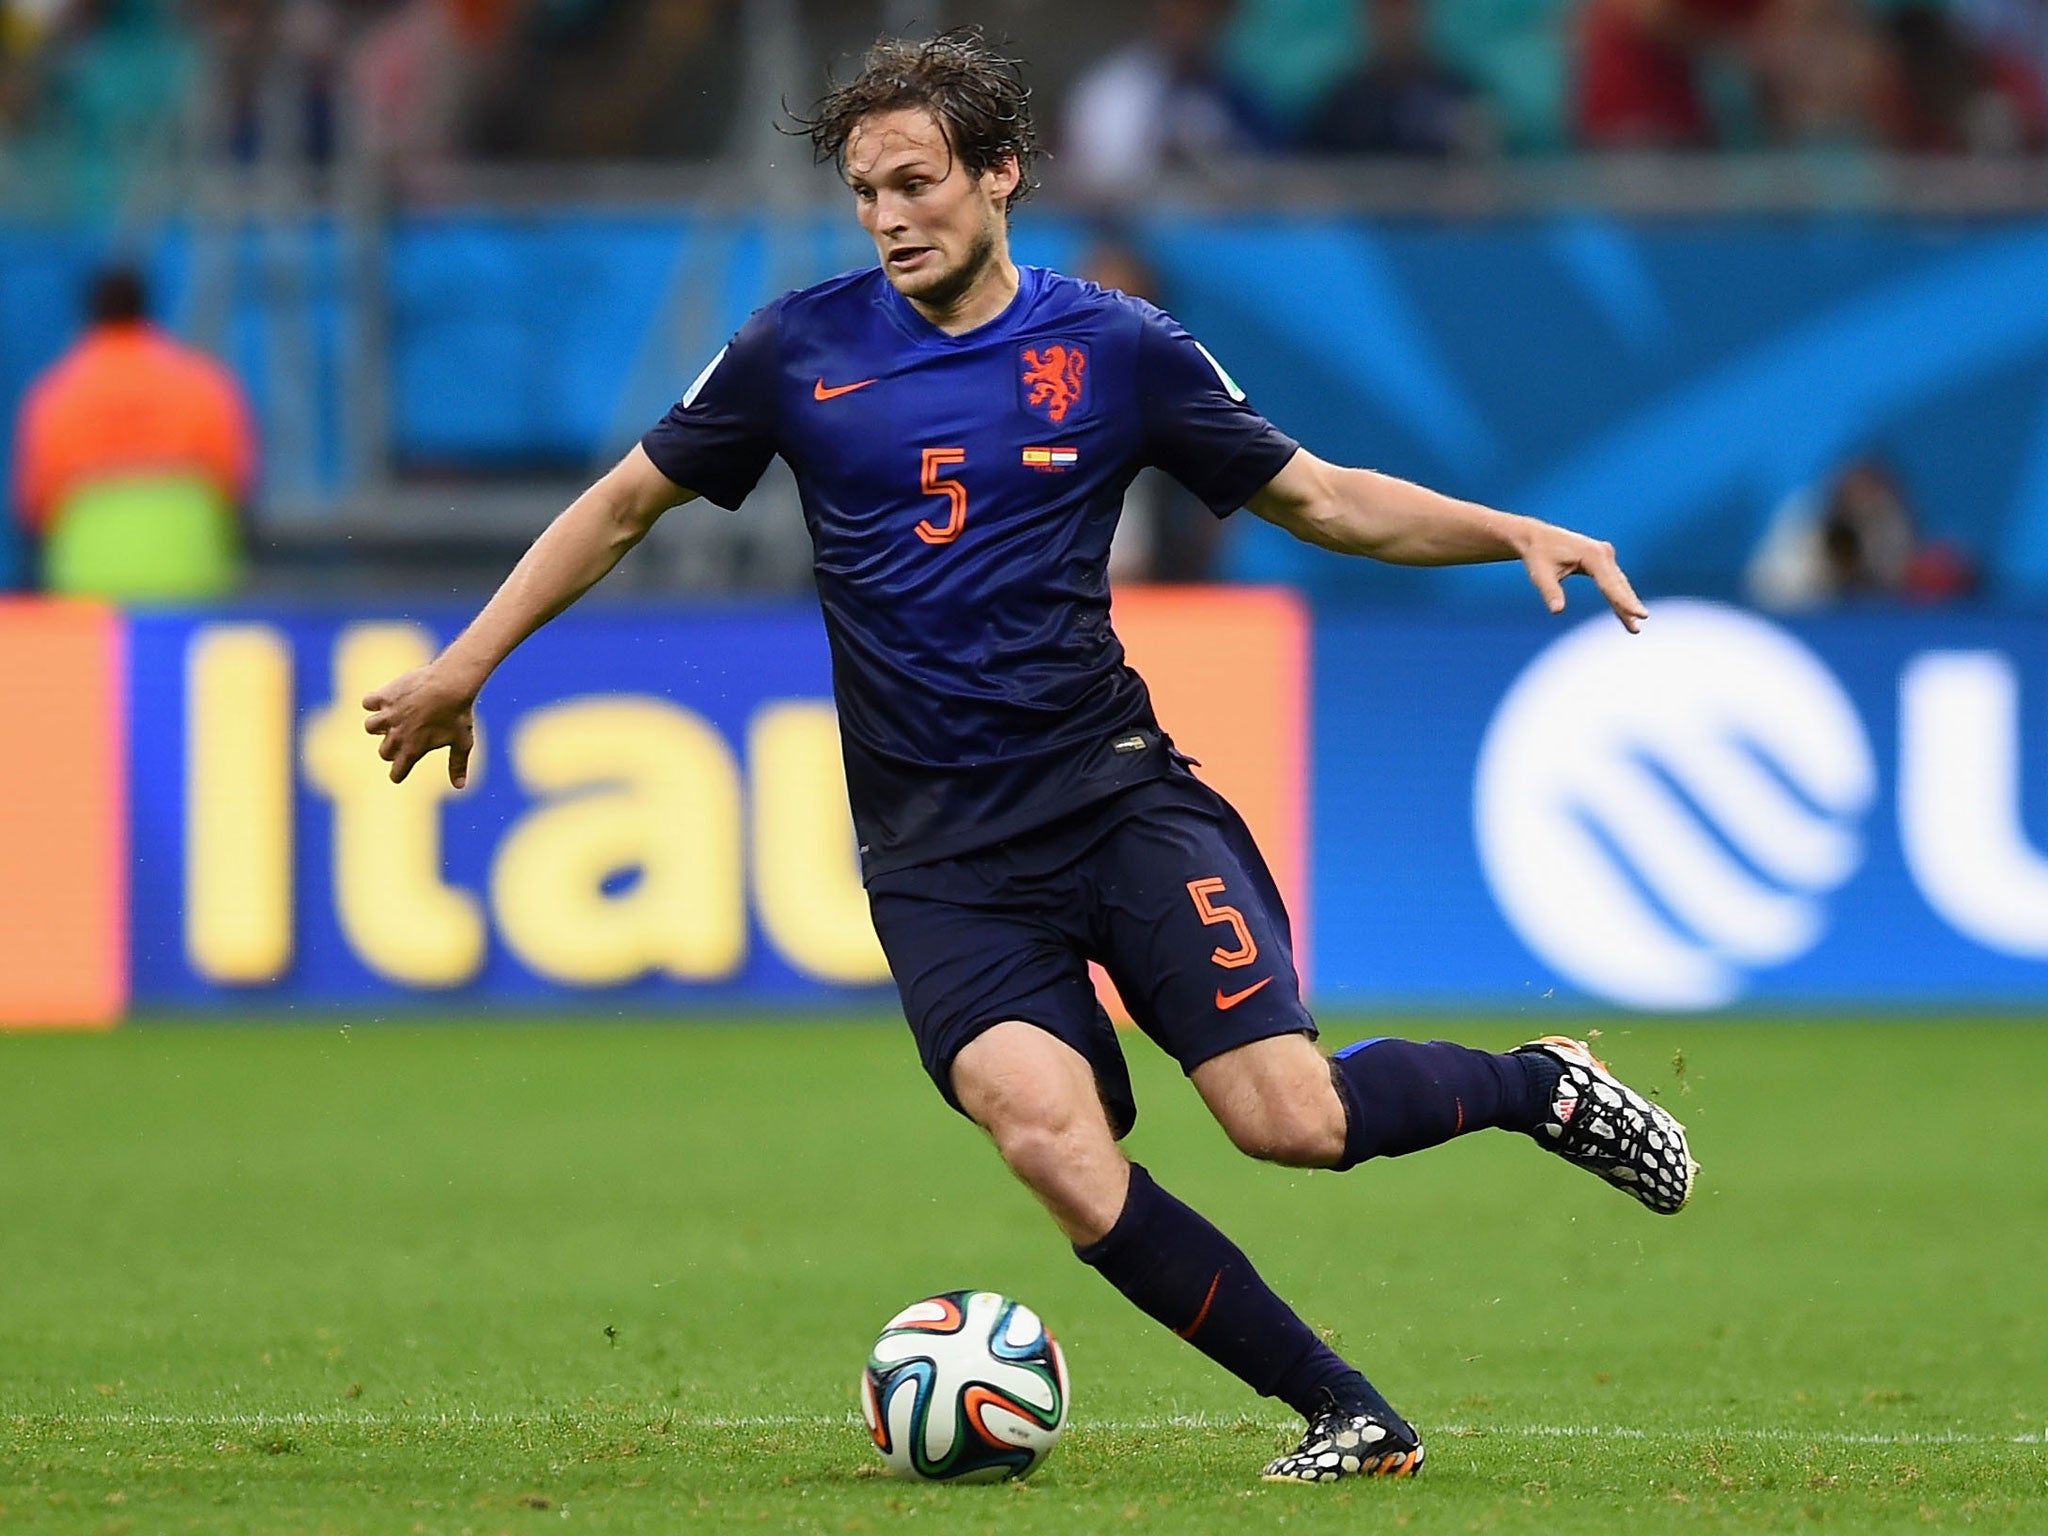 Manchester United have agreed a fee with Ajax for utility man Daley Blind